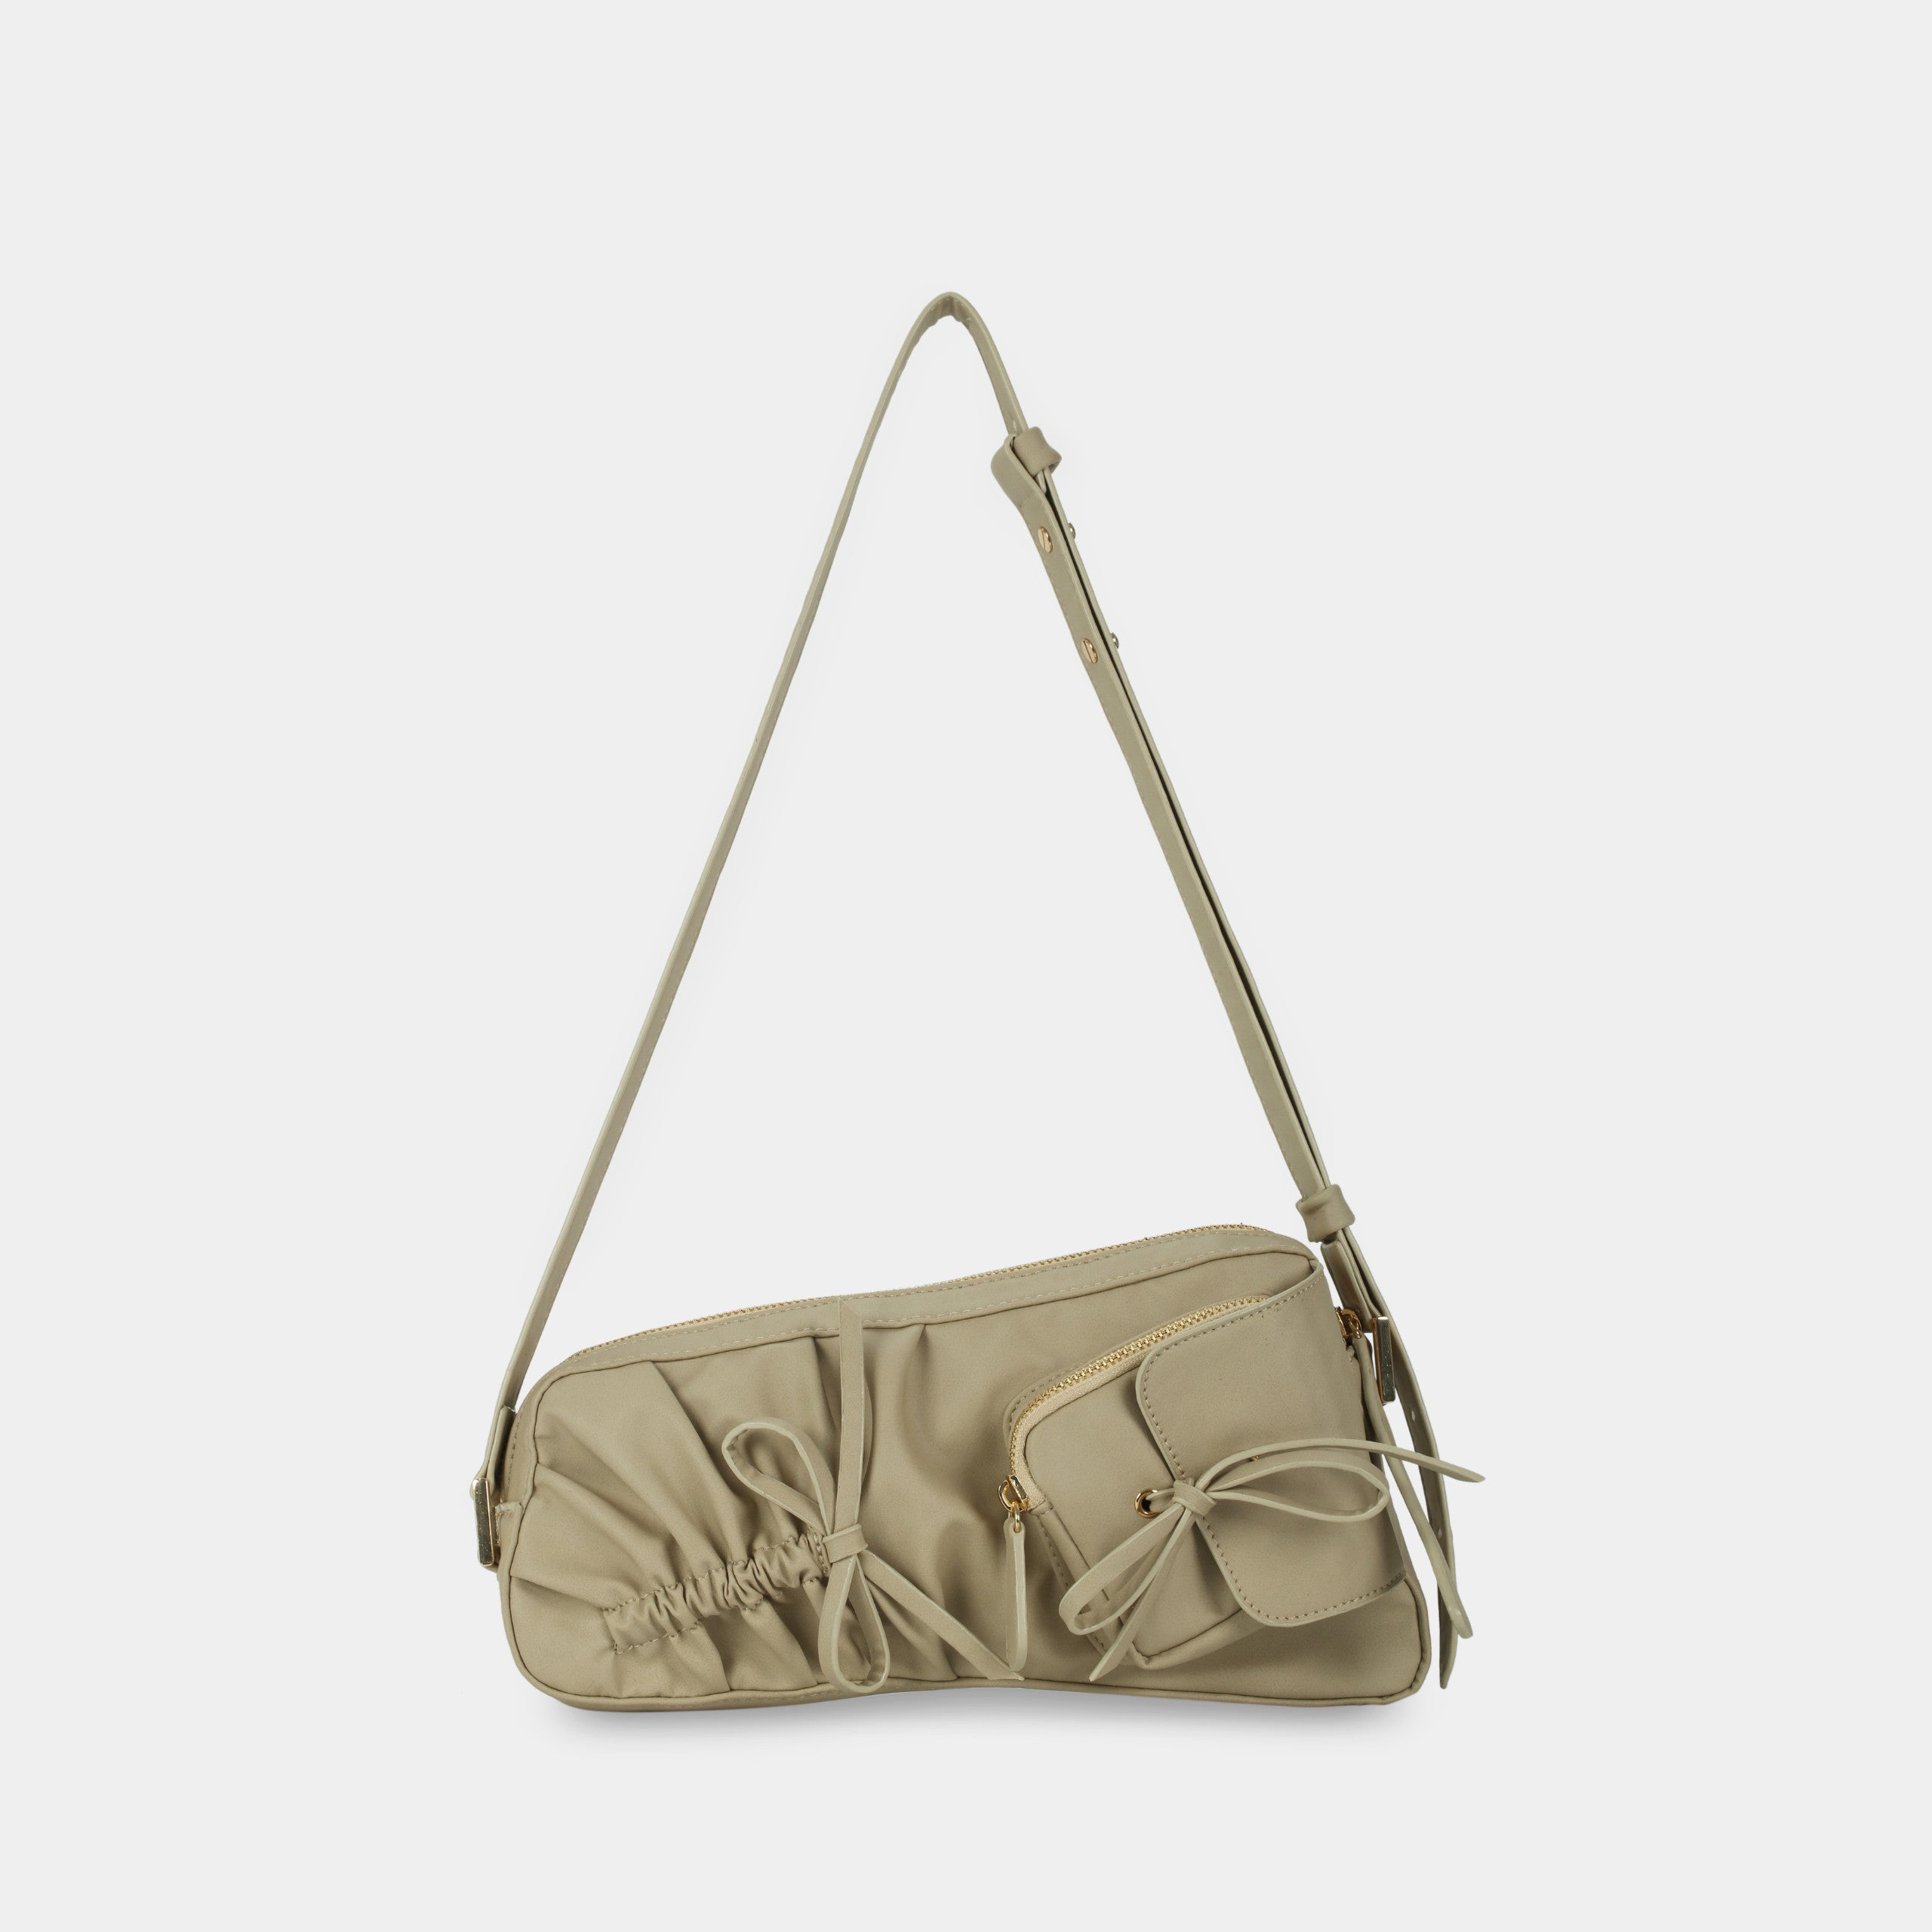 Freely Bag with Bow in Beige